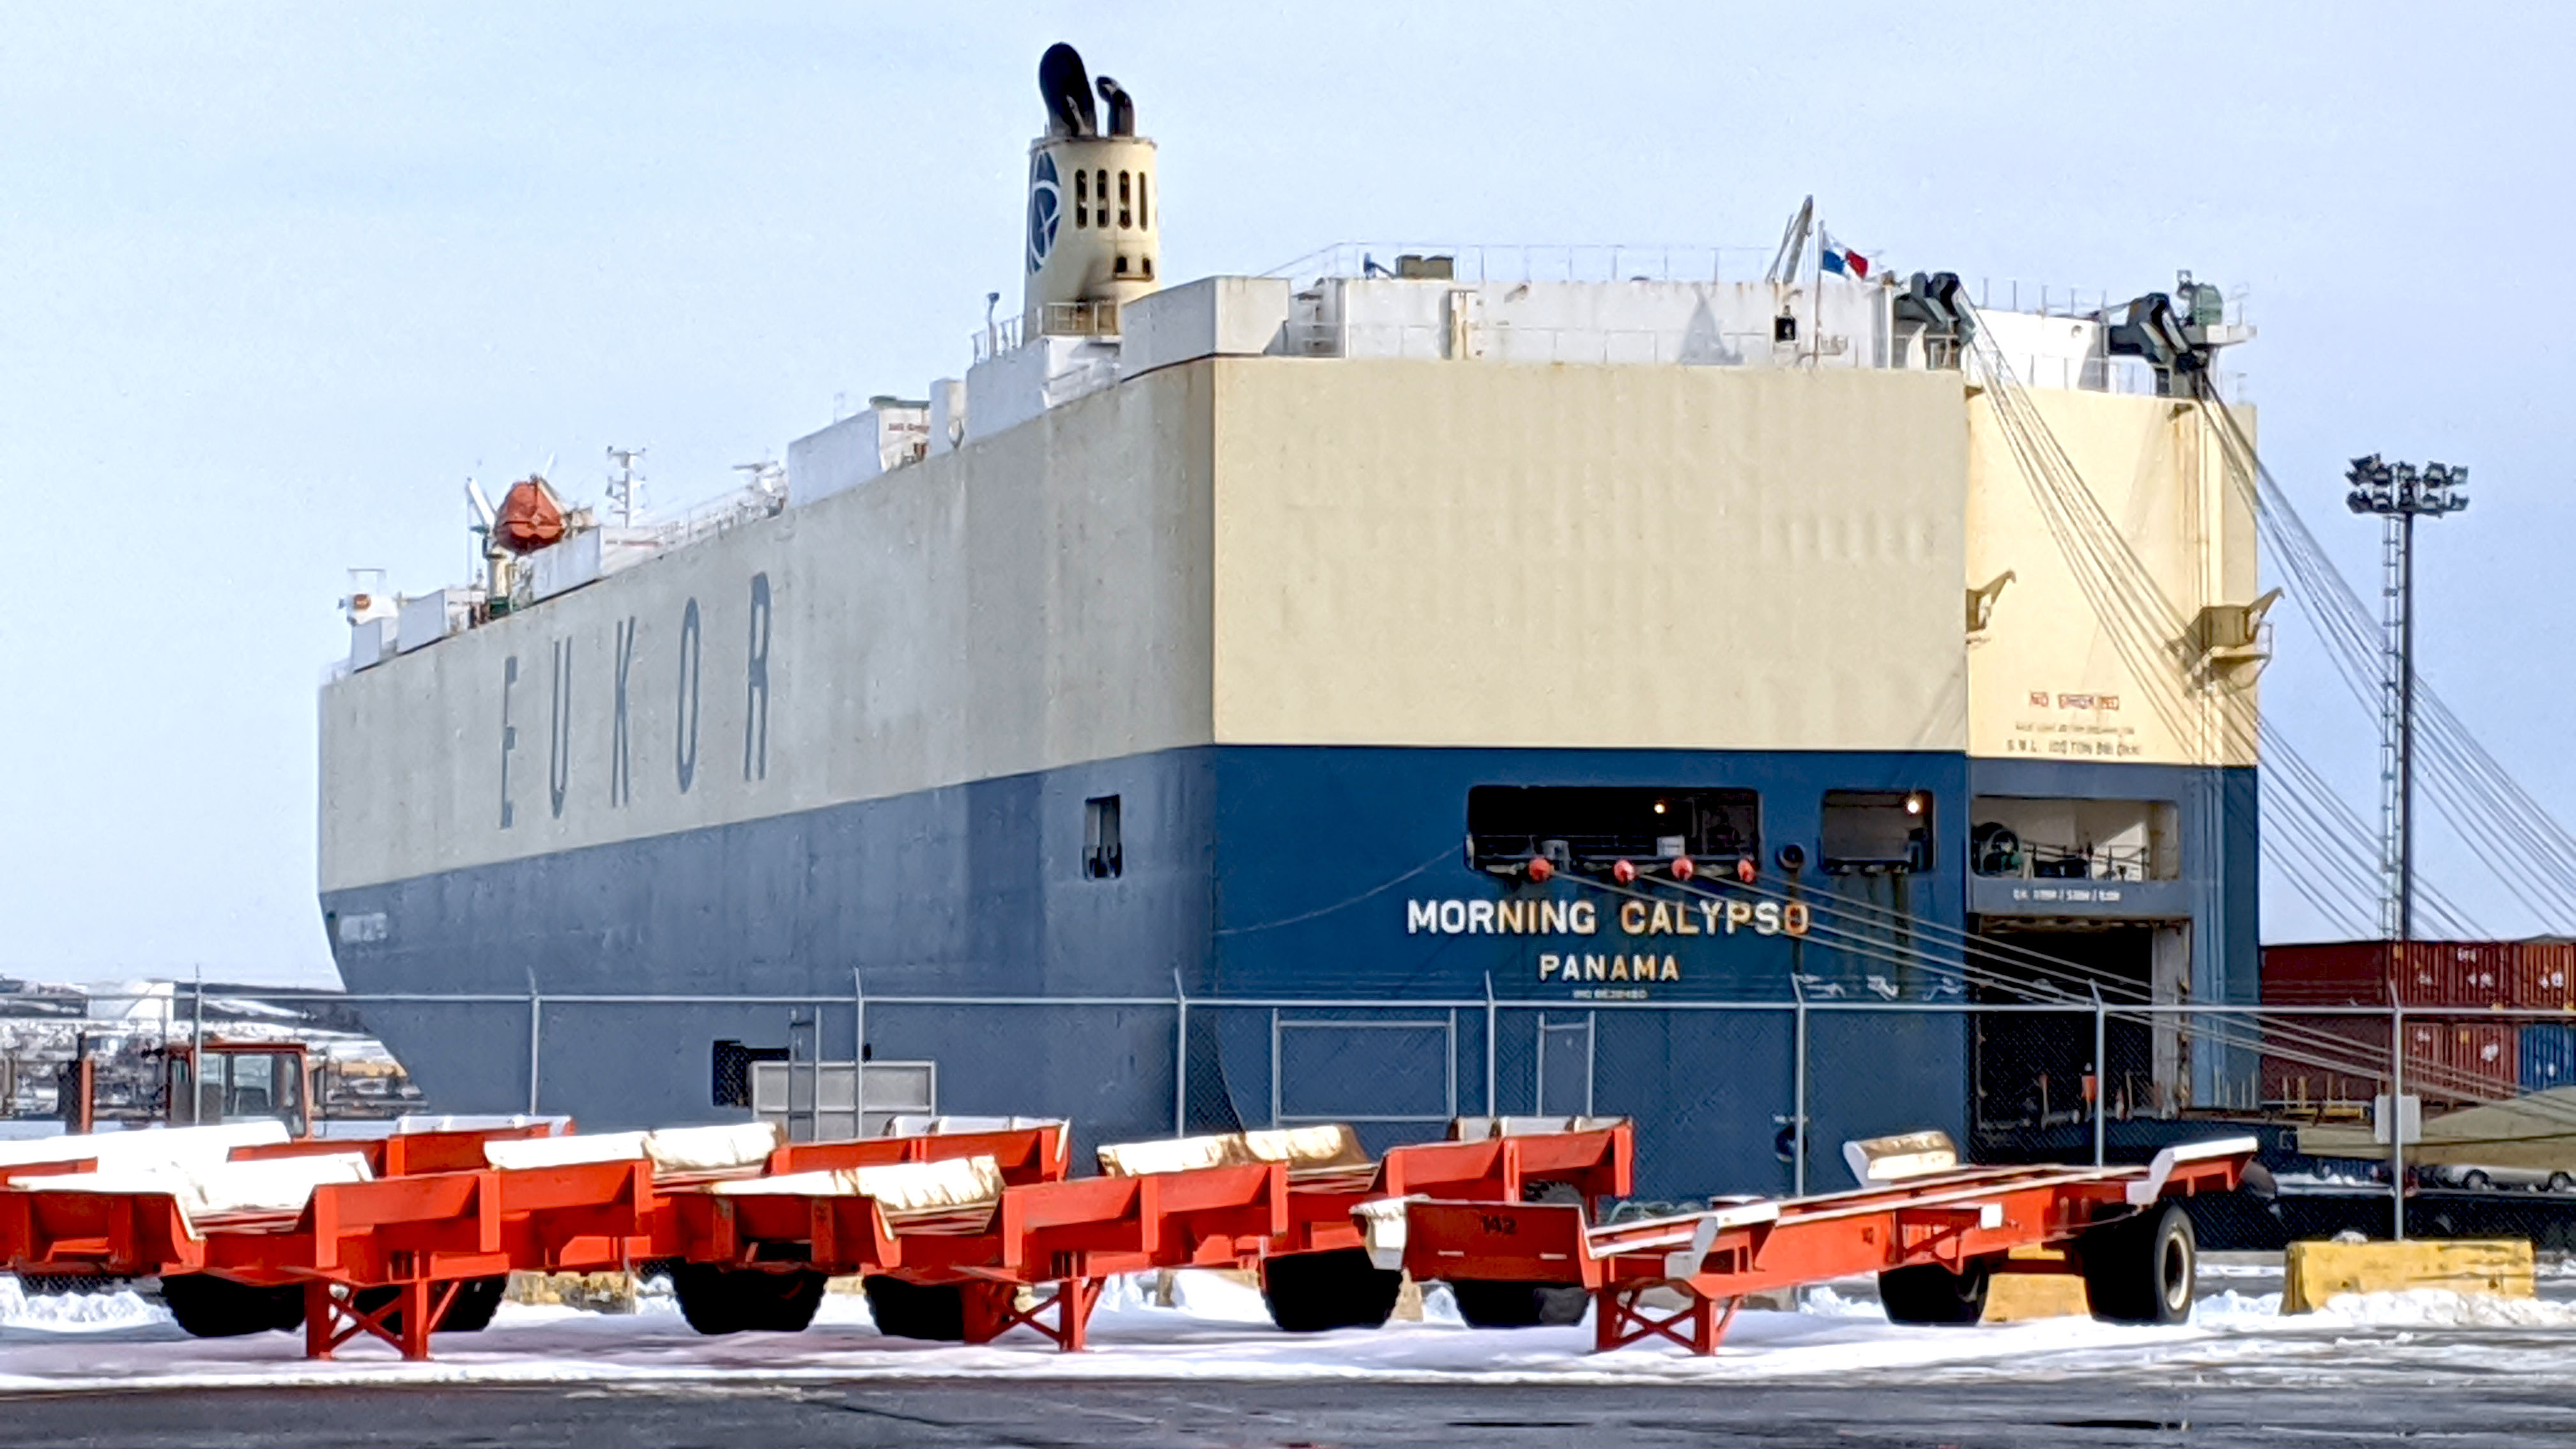 The ship 'Morning Calypso' (which is a vehicle carrier) docked at Pier 31 in Halifax.